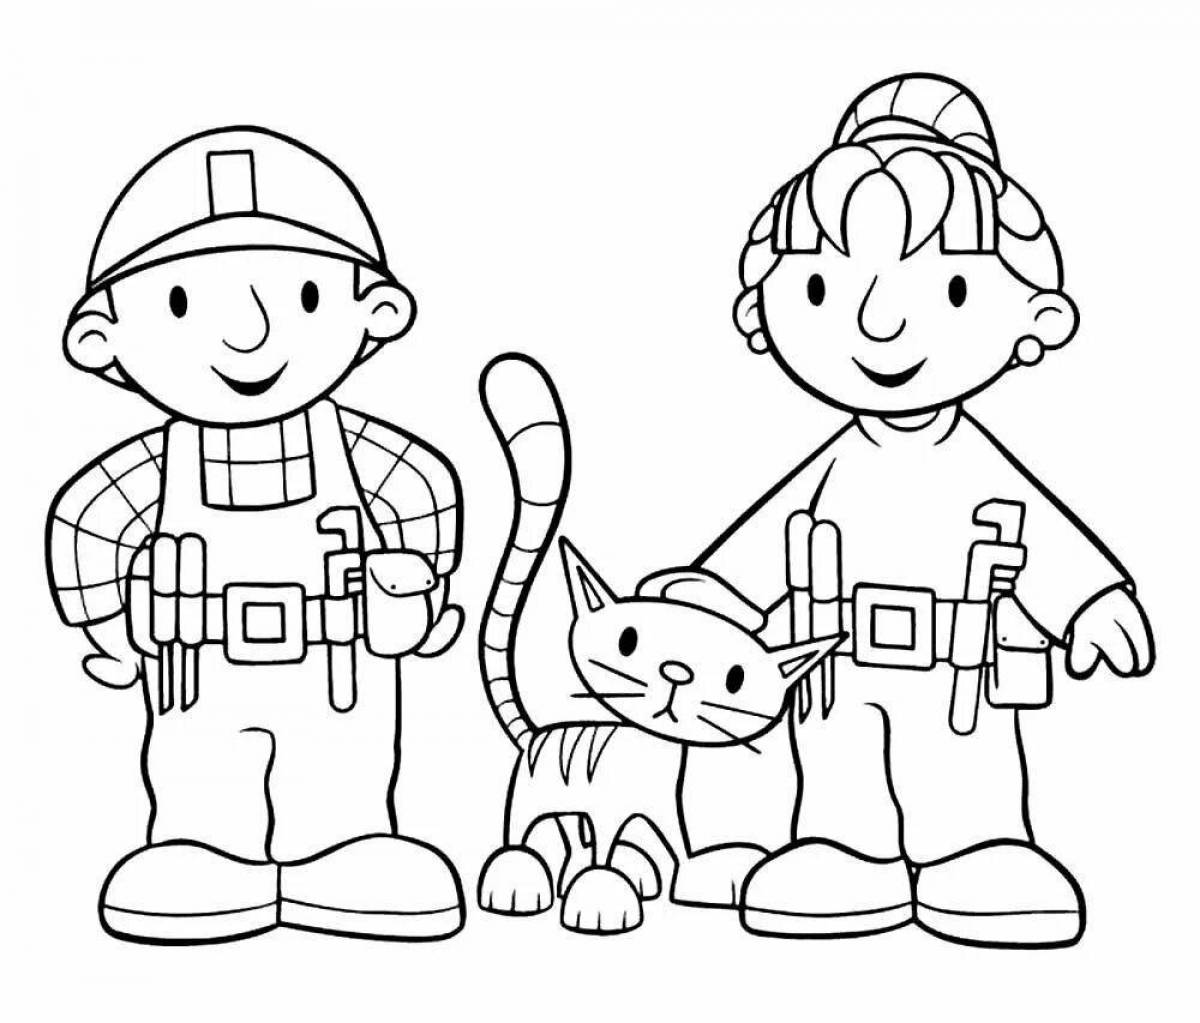 Colorful occupations coloring pages for kindergarten children